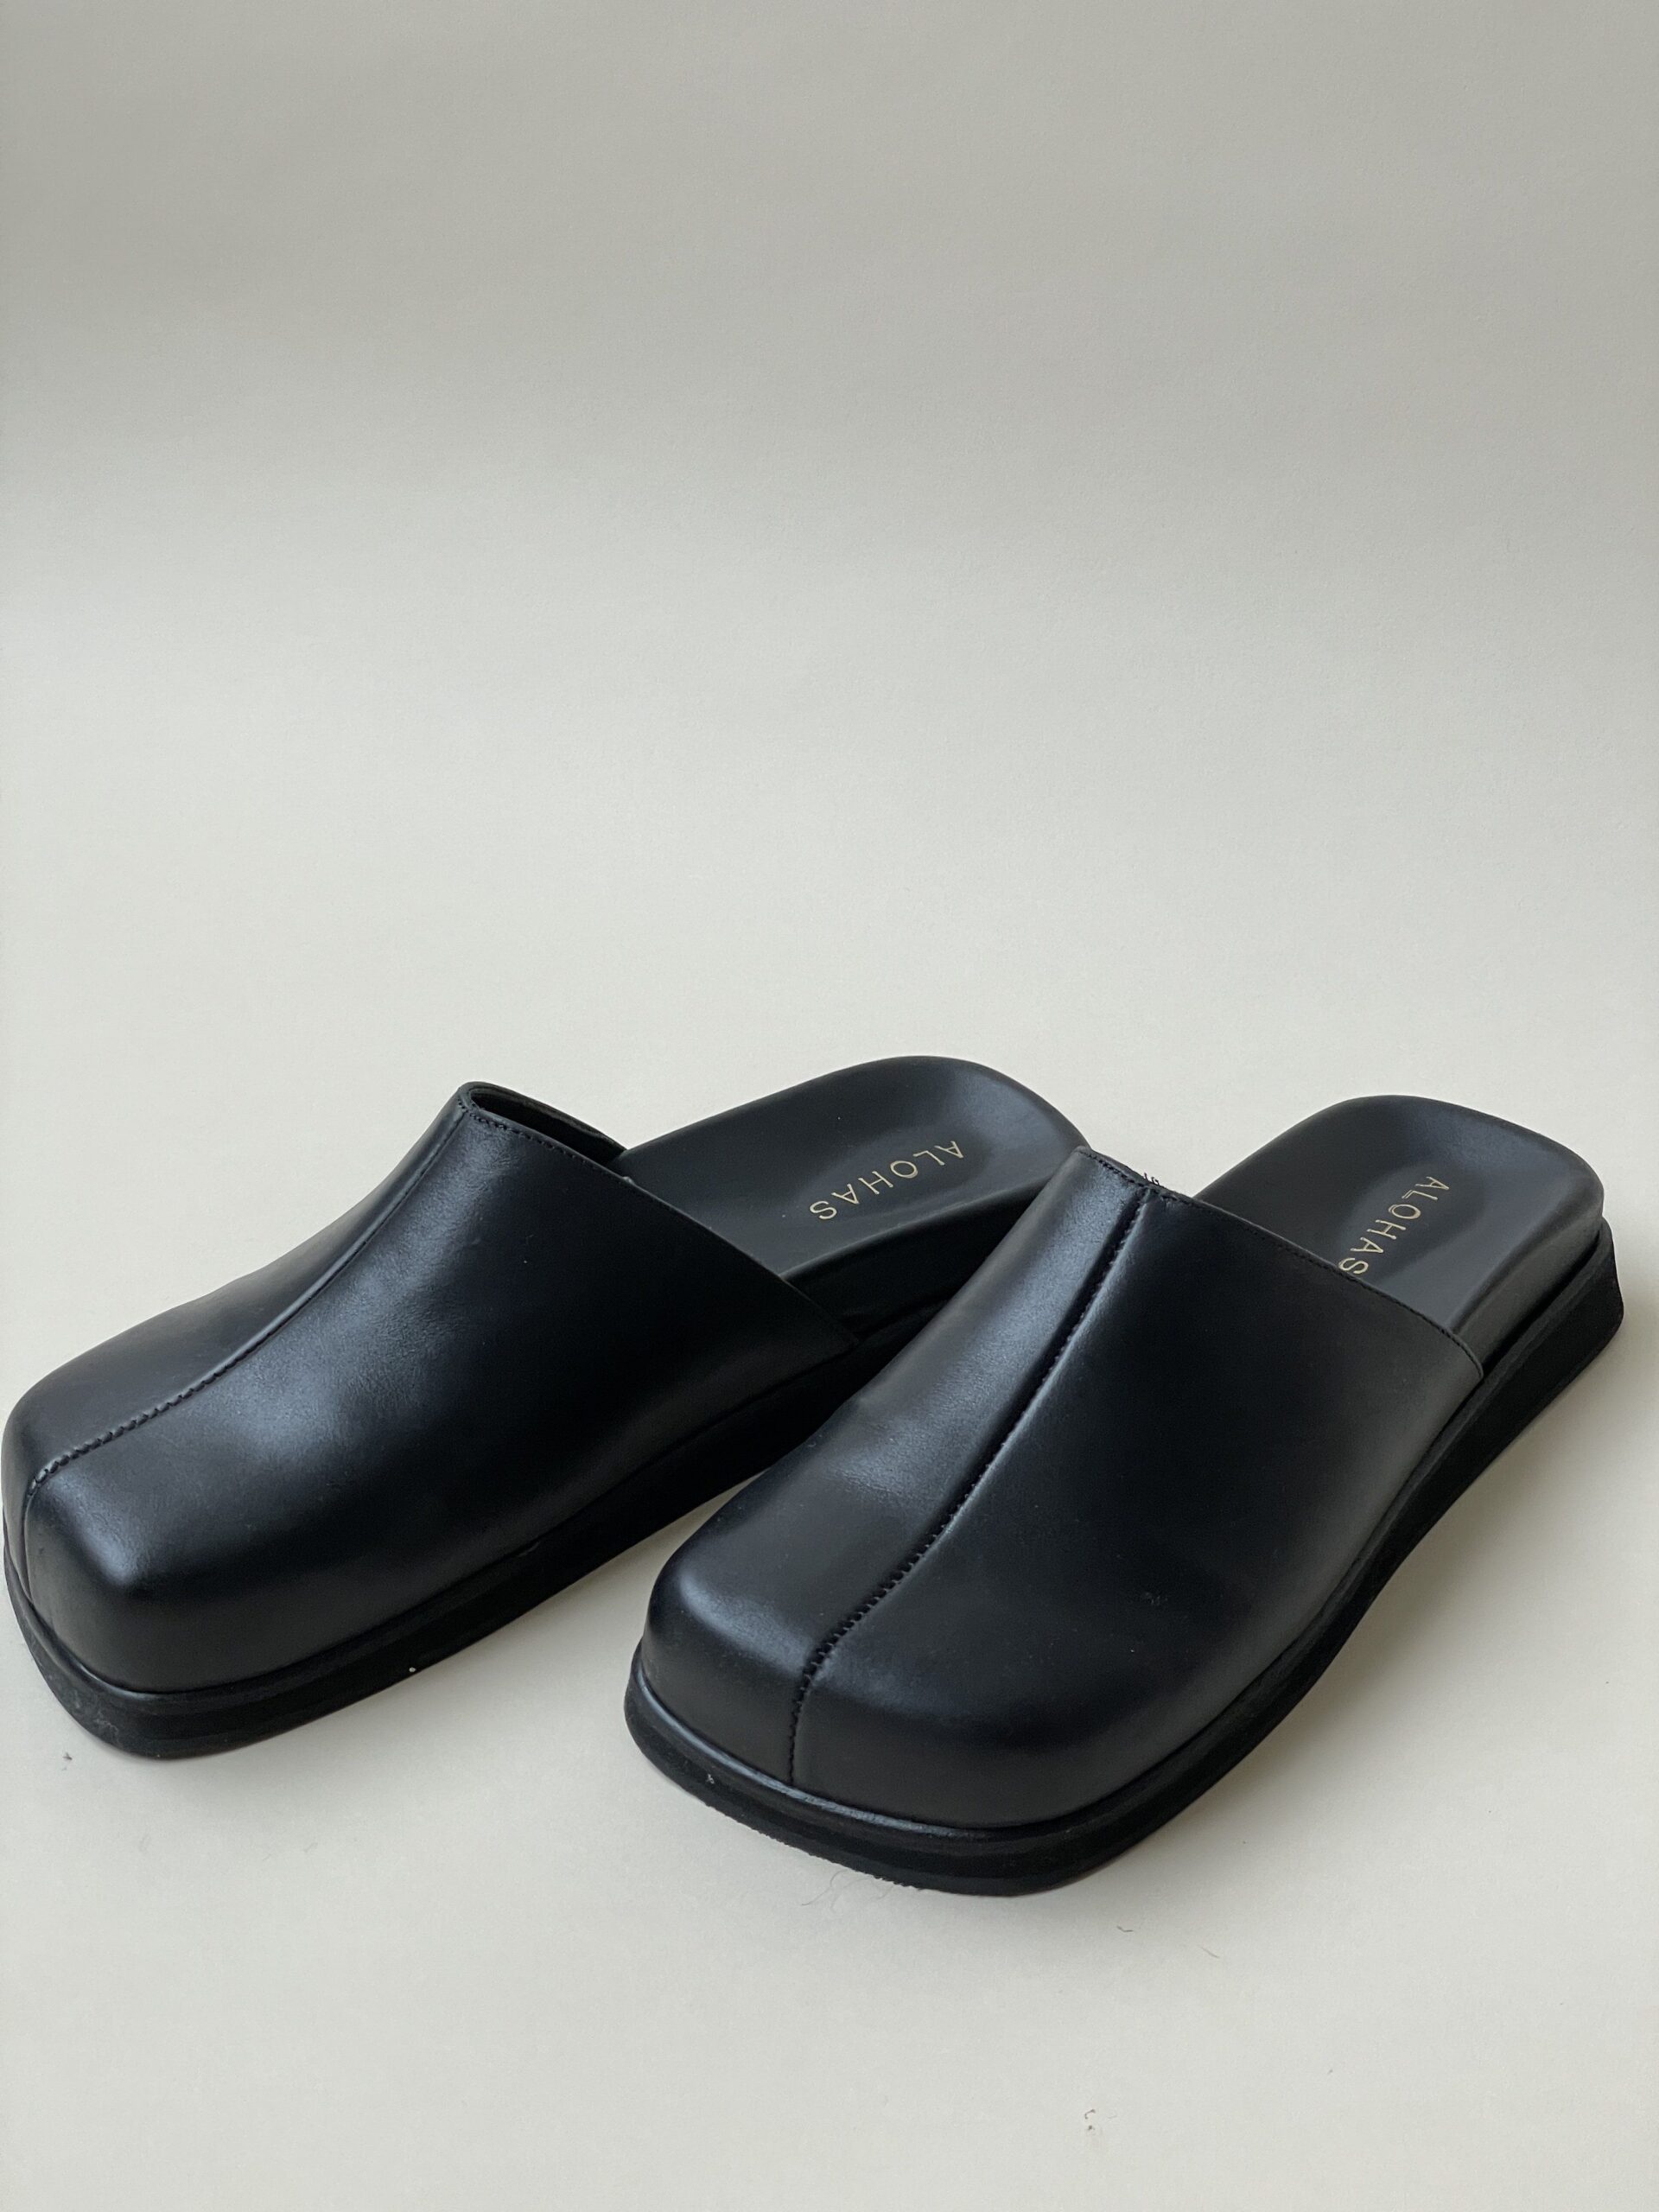 How to choose right clog shoes?